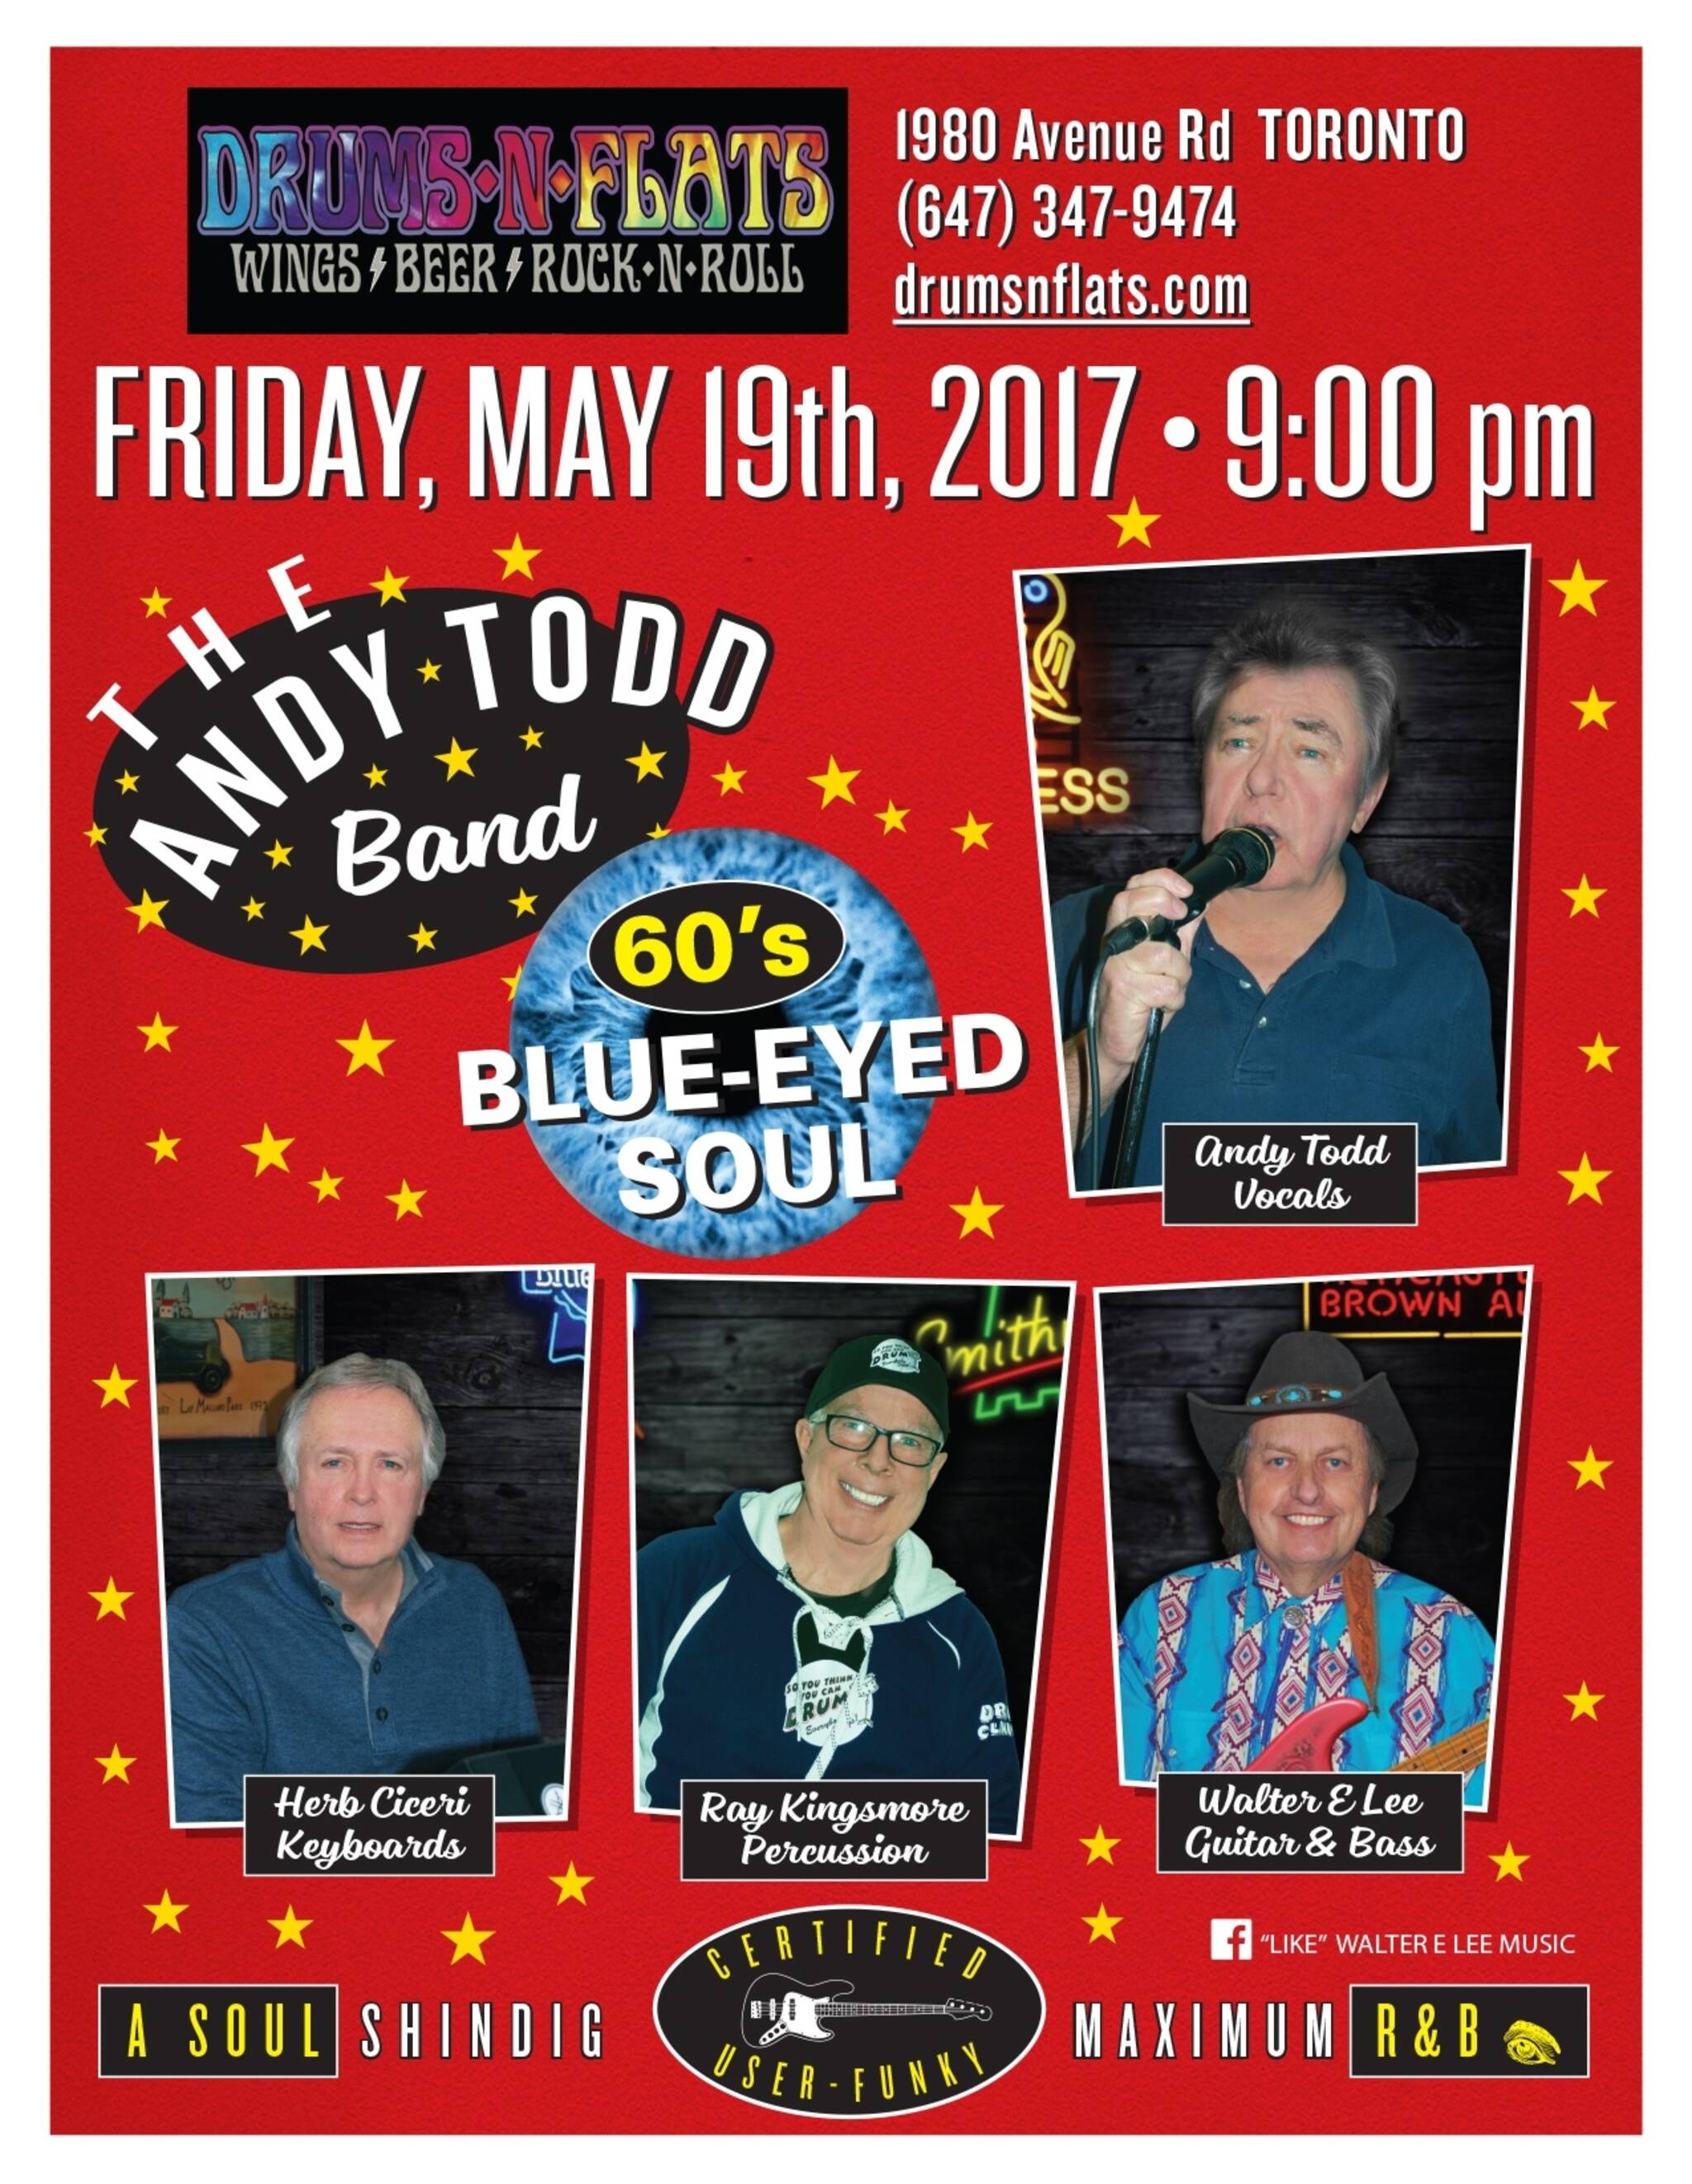 A Soul Shindig featuring The Andy Todd Band